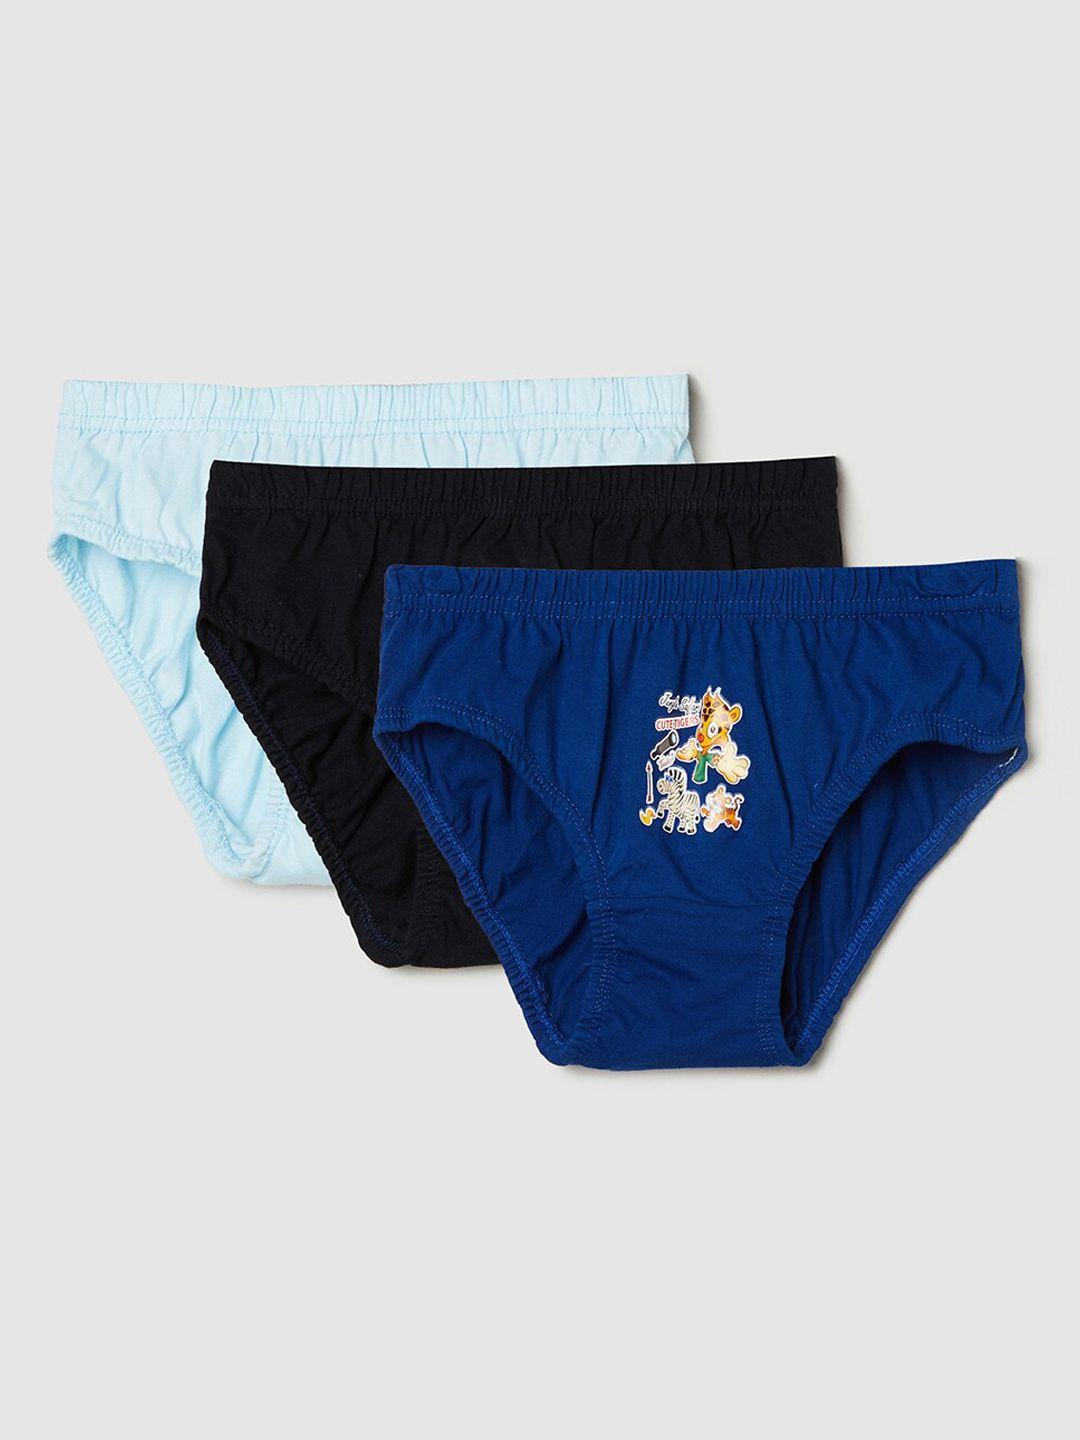 max pack of 3 boys briefs - noosfb002multi